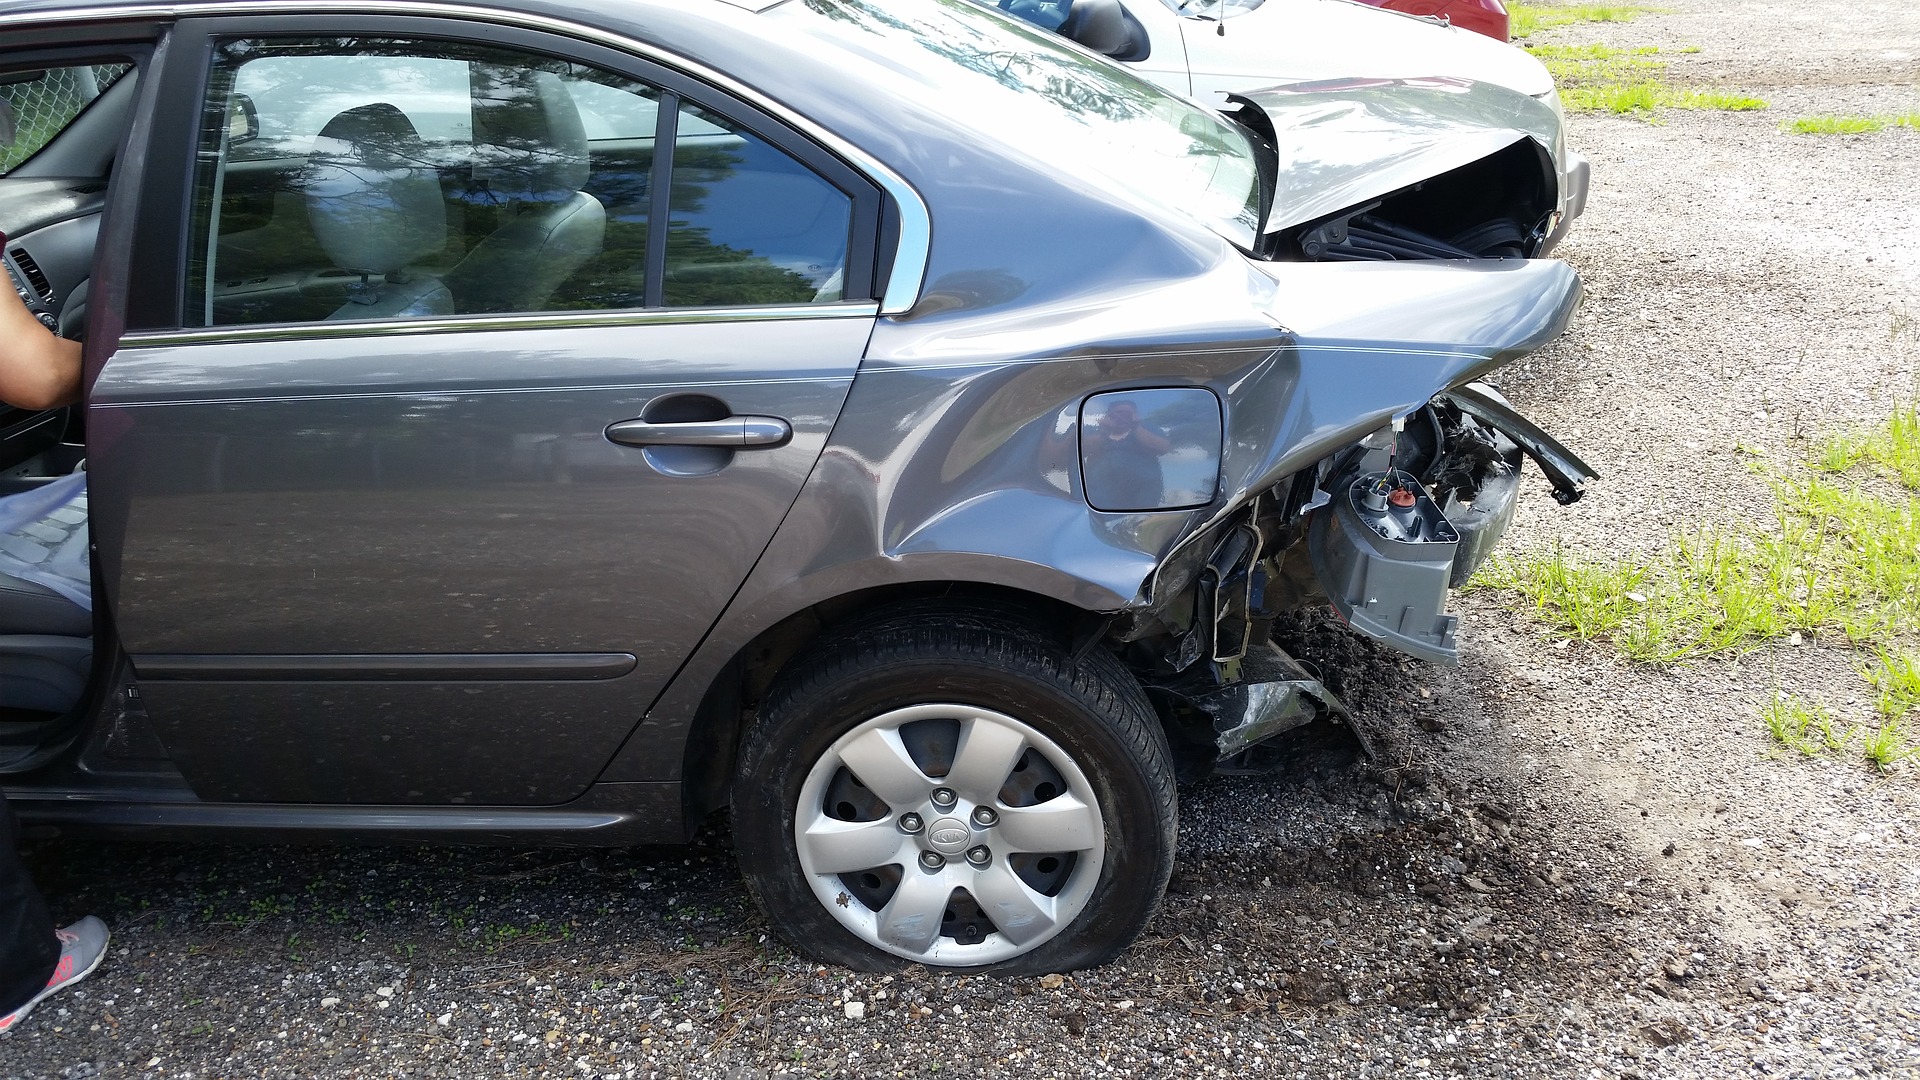 7 Things You Should Not Do After an Auto Accident